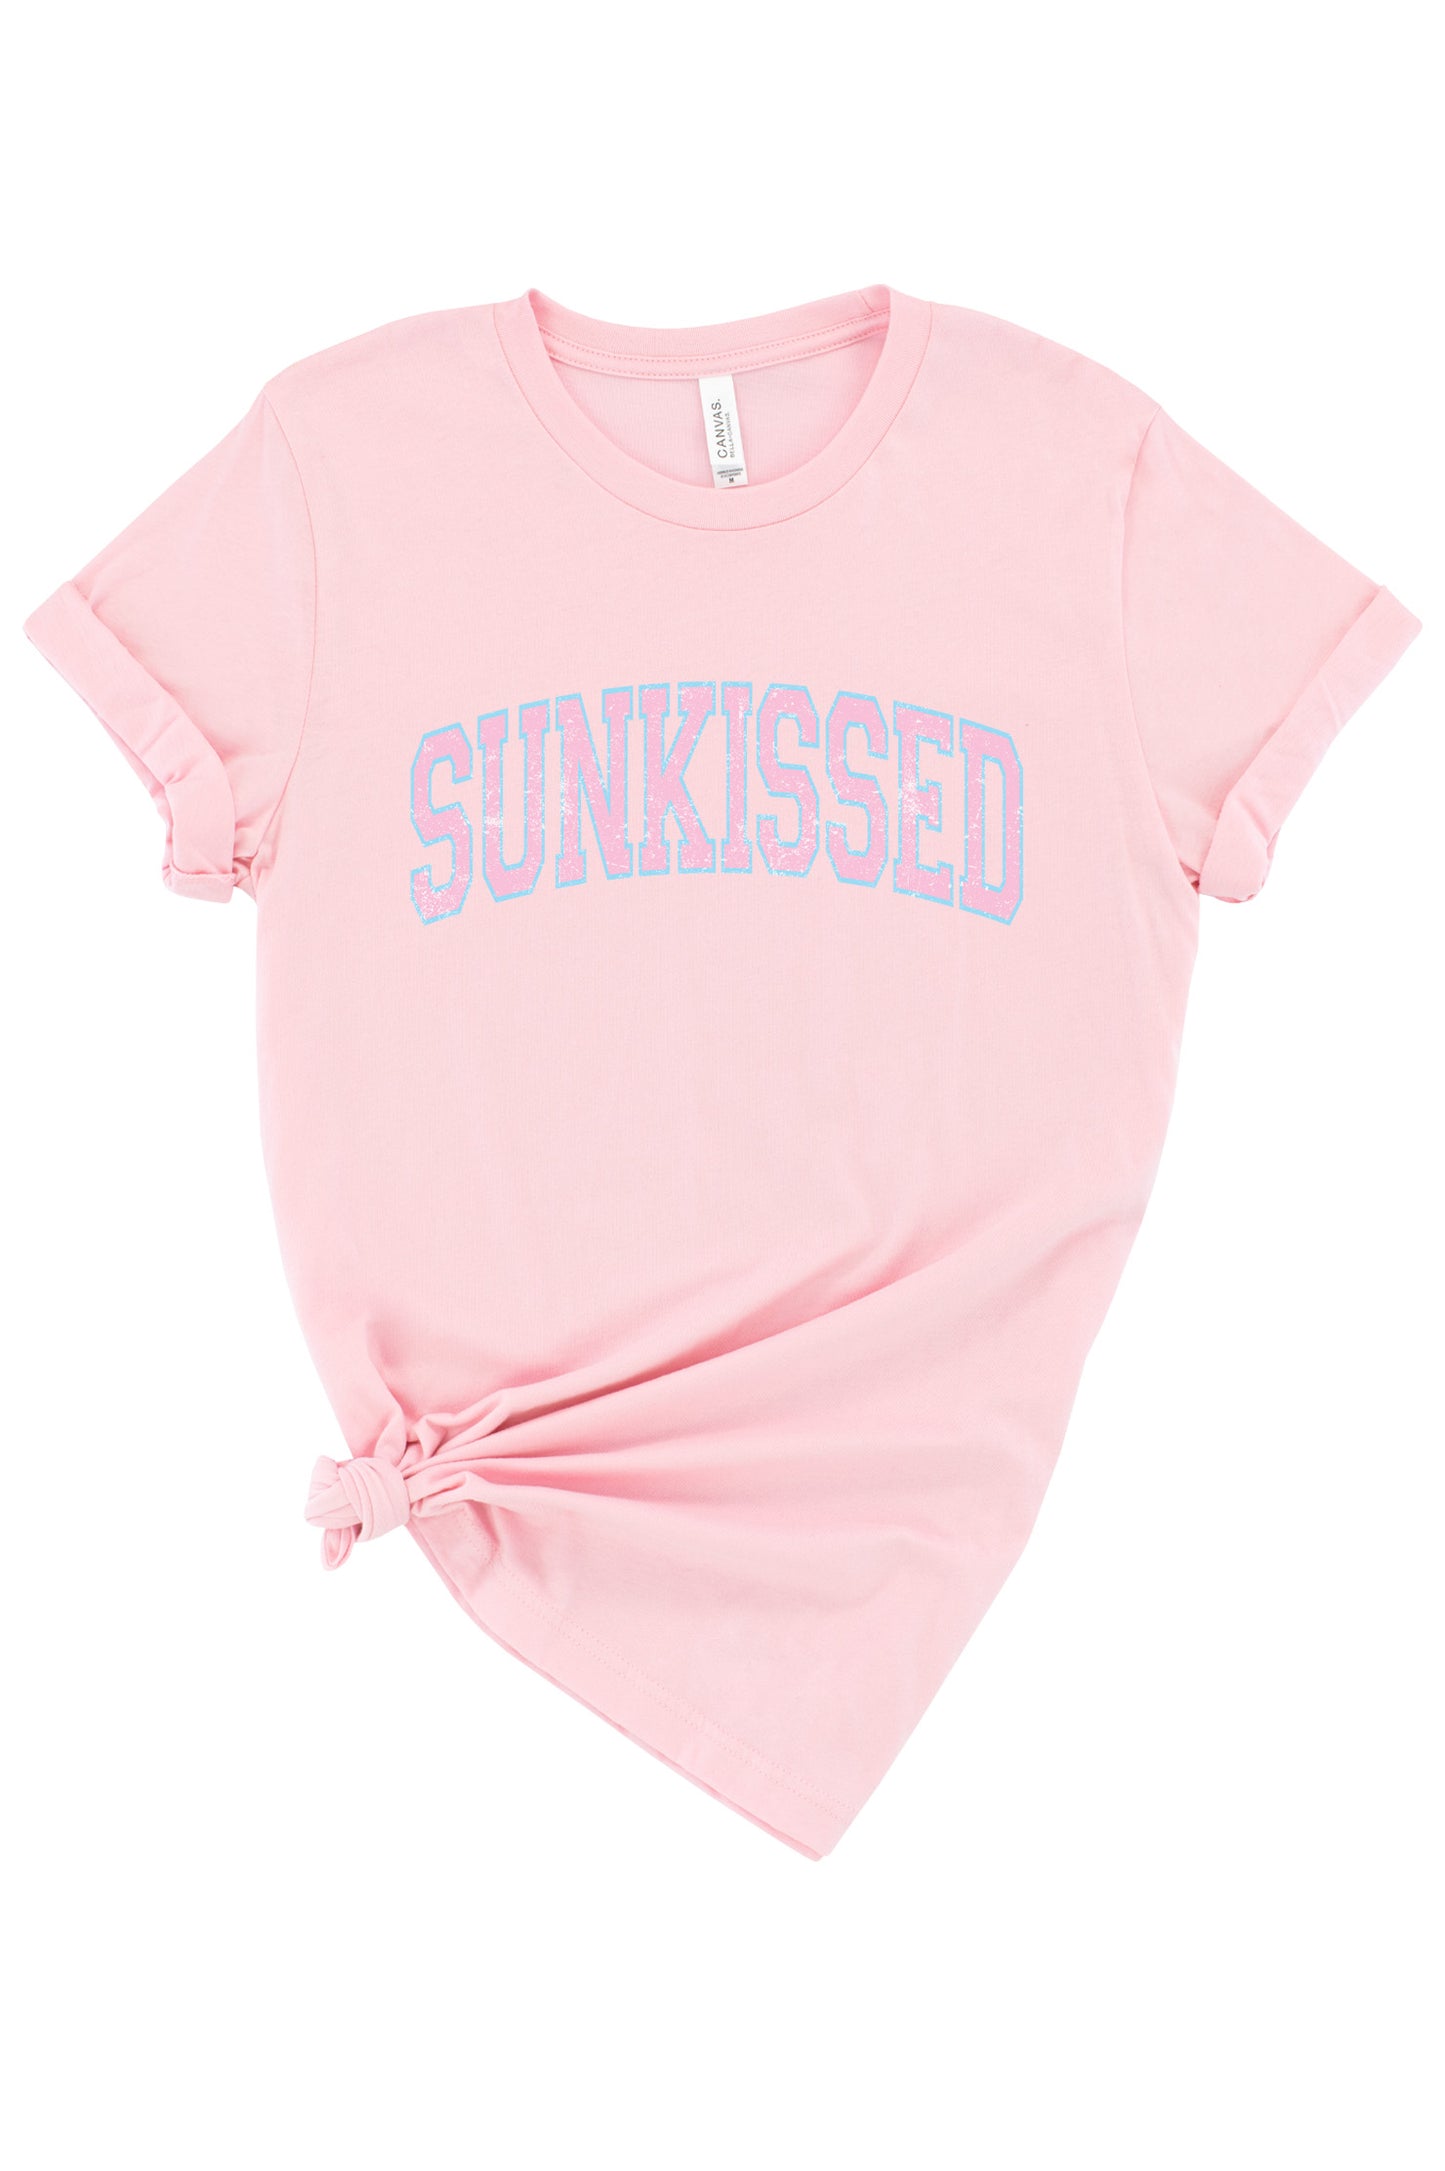 Sunkissed Graphic Tee